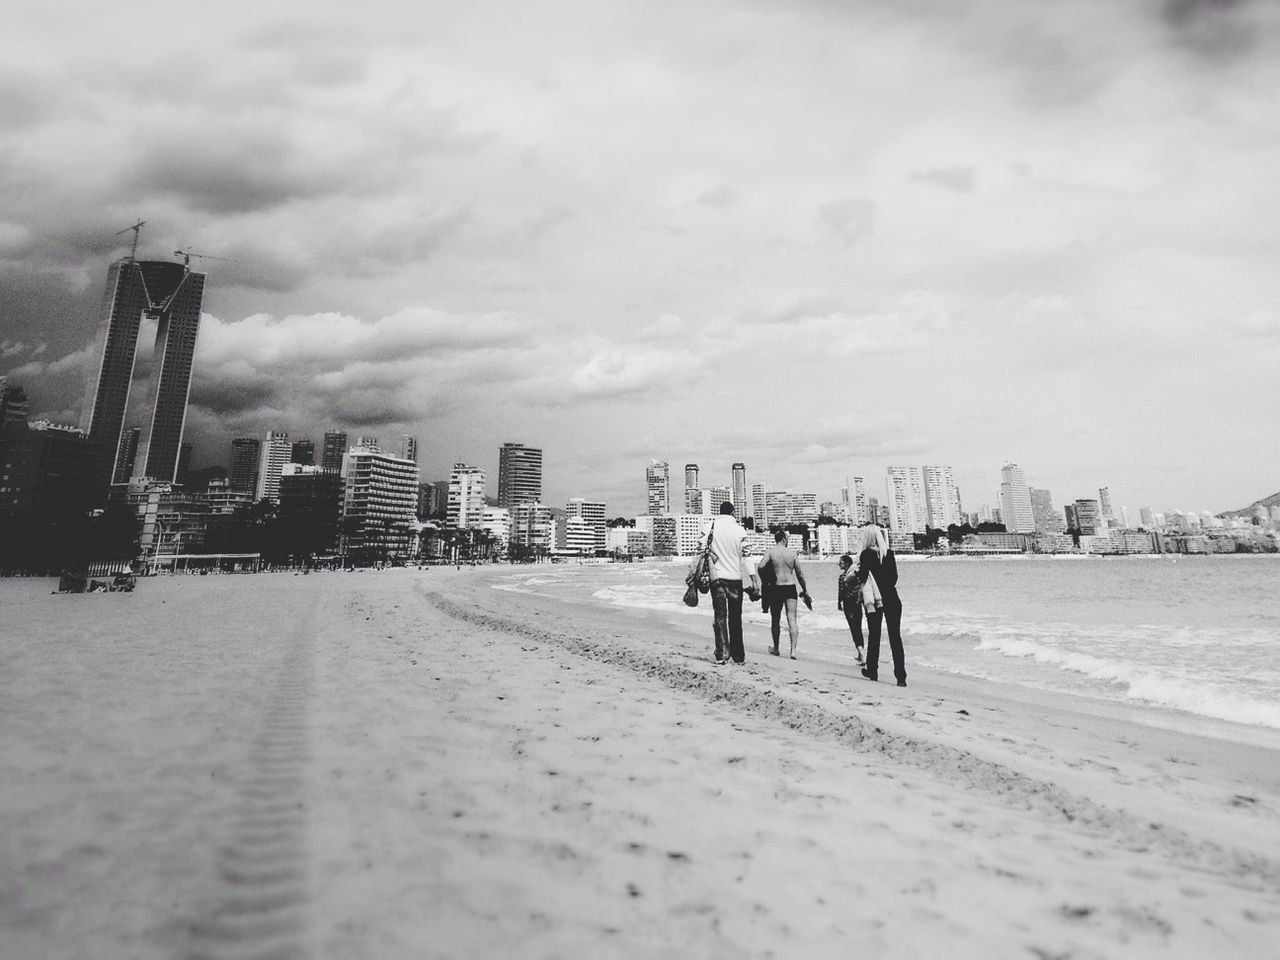 People walking on beach with cityscape in background